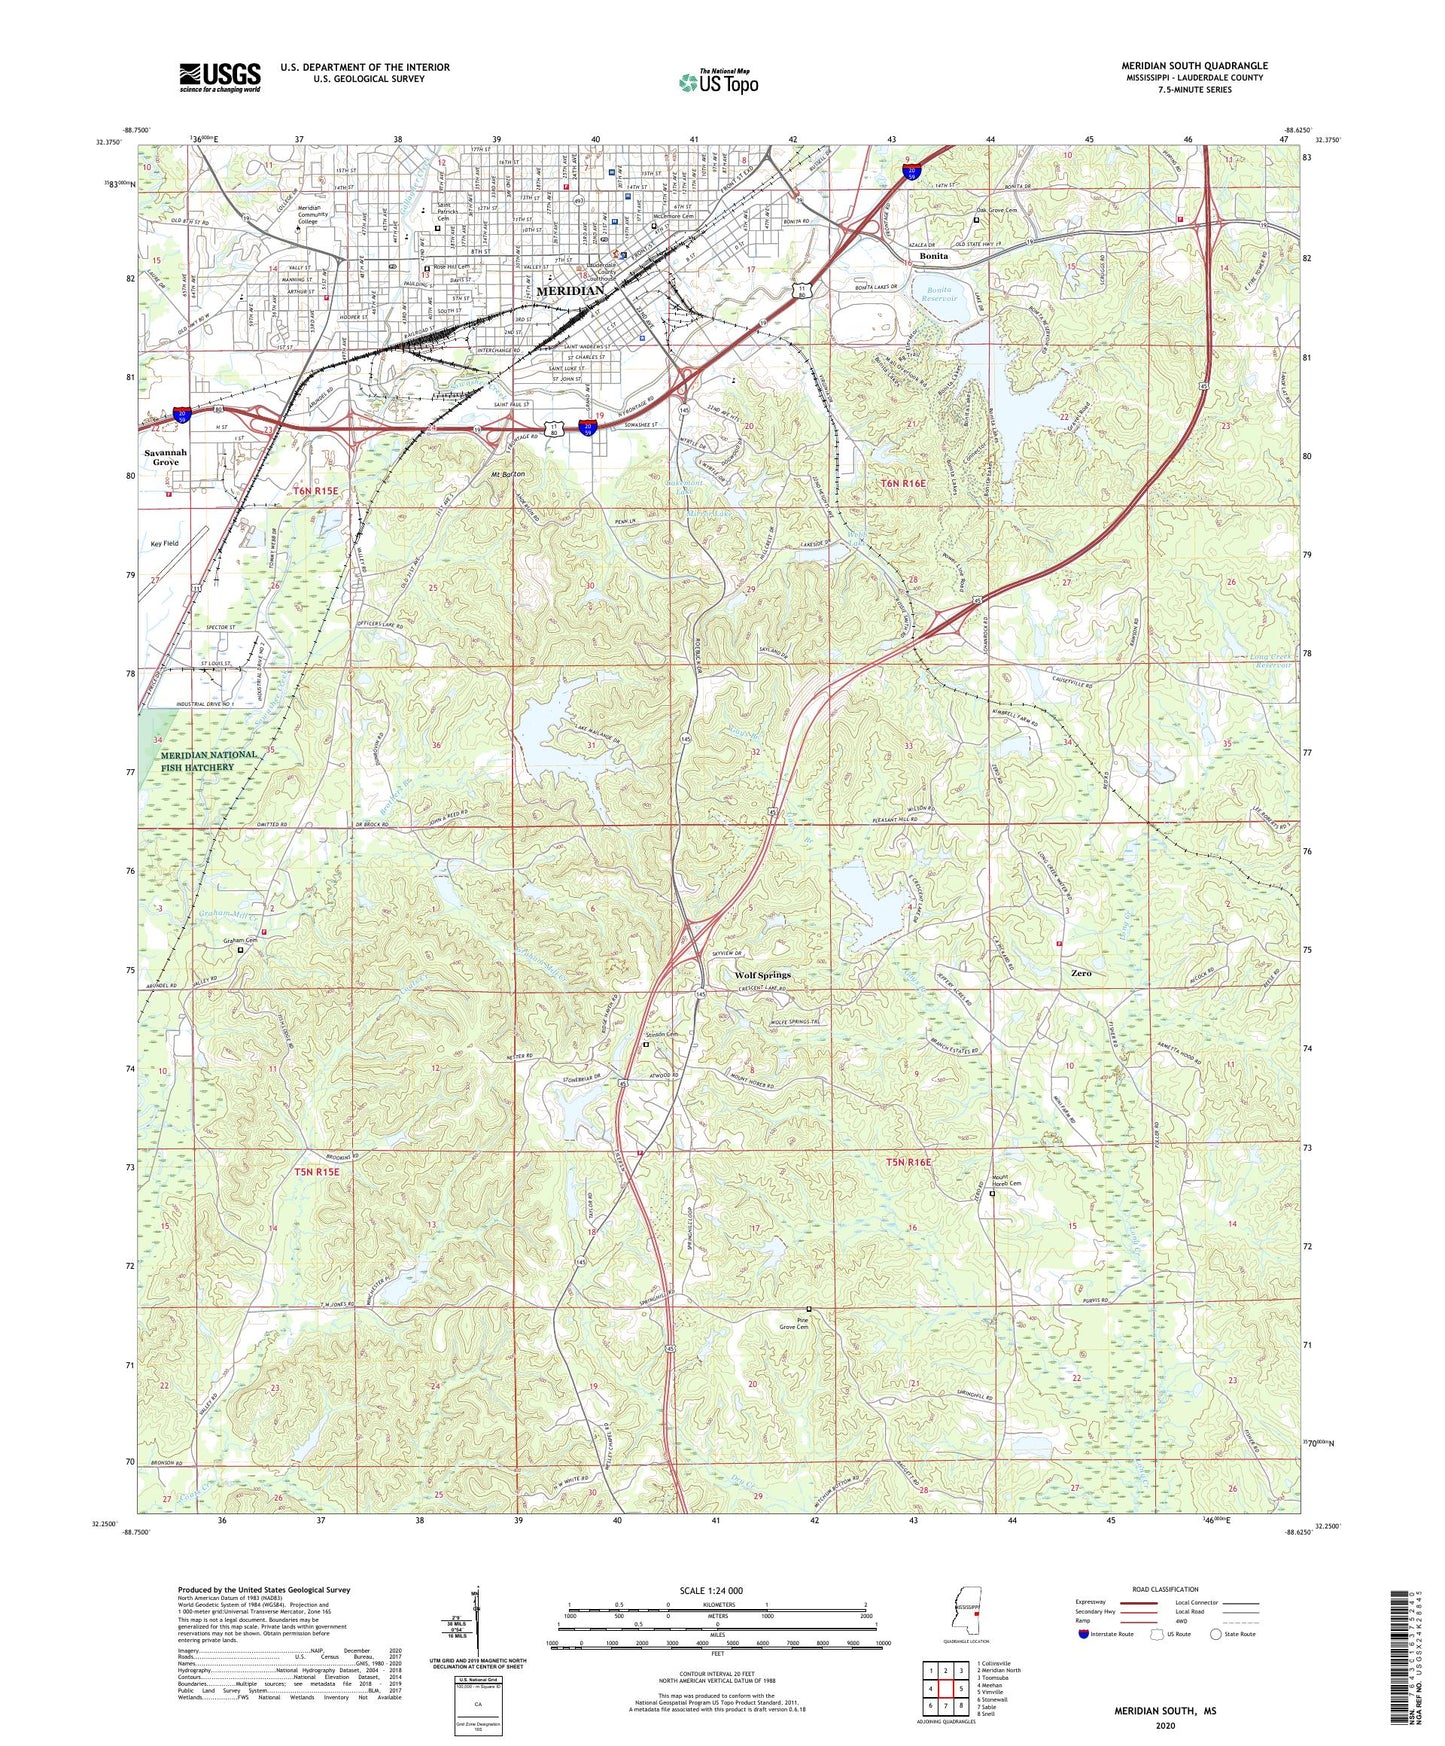 Meridian South Mississippi US Topo Map Image